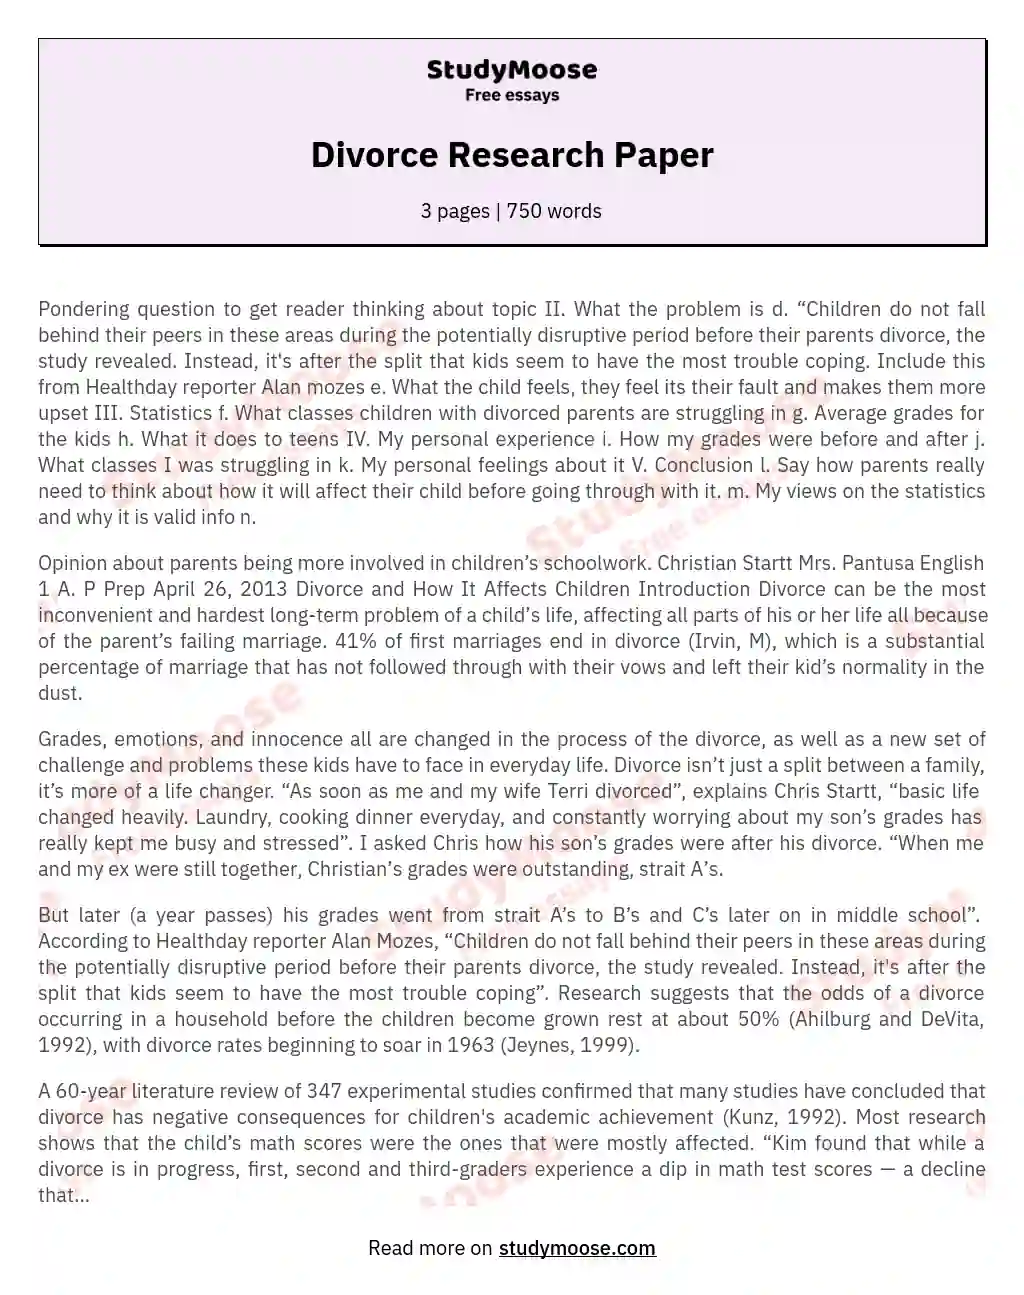 causes of divorce research paper